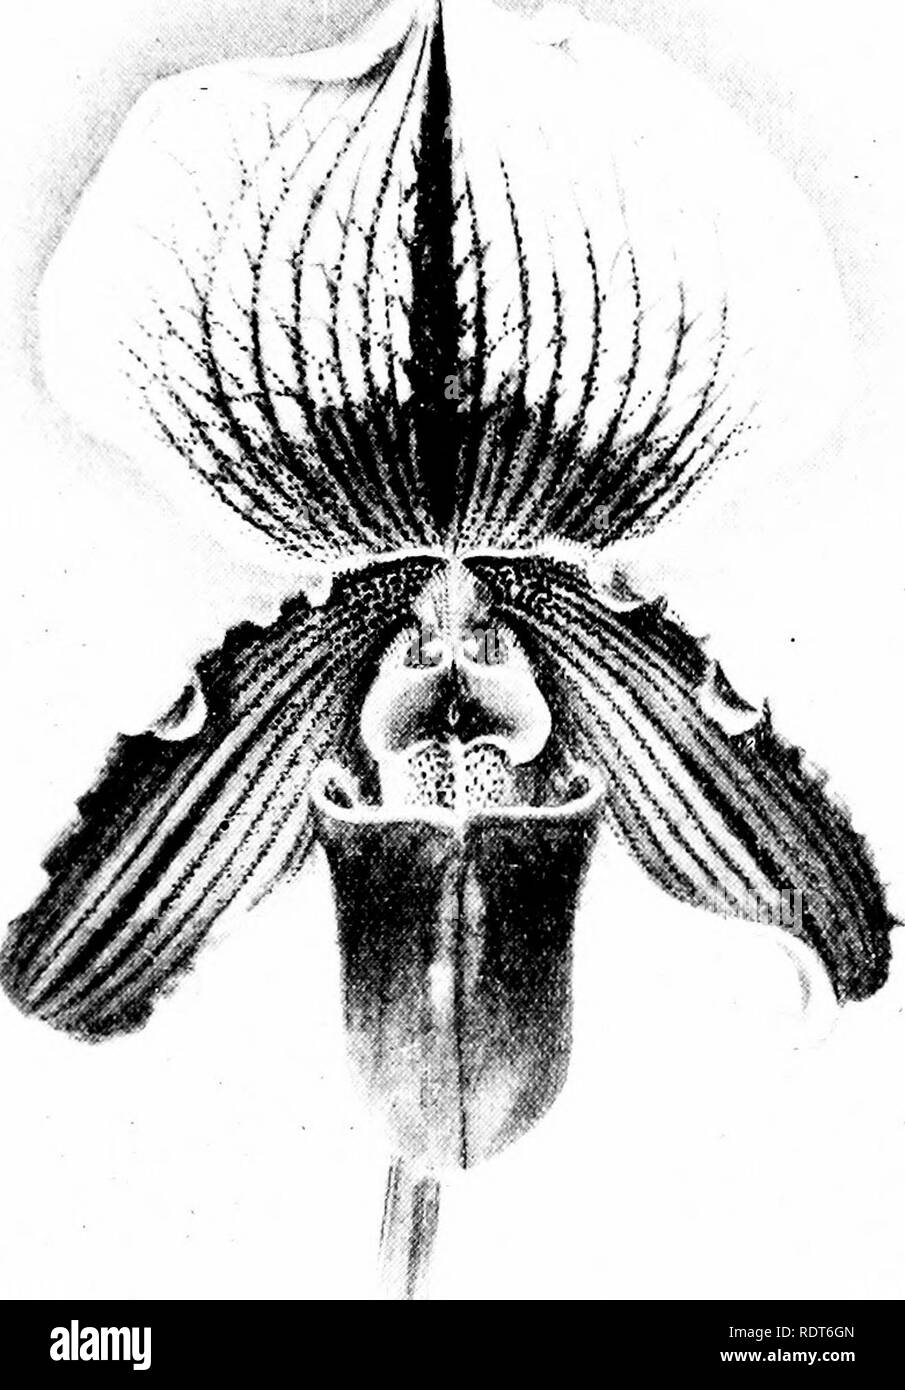 . The orchid stud-book: an enumeration of hybrid orchids of artificial origin, with their parents, raisers, date of first flowering, references to descriptions and figures, and synonymy. With an historical introduction and 120 figures and a chapter on hybridising and raising orchids from seed. Orchids. Part 11.1 THE ORCHID STUD-BOOK. 187 C. X Haynaldo-Chamberlainianum, O.K. 1897, 350.—E. Ashworth. C. X Myra, Boyle Wood!. 0. 179.—R. H. Measures. 410. P. X Nandii (callosum 2 Tautzianum). — R. 1. Measures, 1894. C. x Nandii, G.C. 1S94, ii. 318; O.R. 1894, 310, 319; G.M. 1895, 403, f. 511. P. X Na Stock Photo